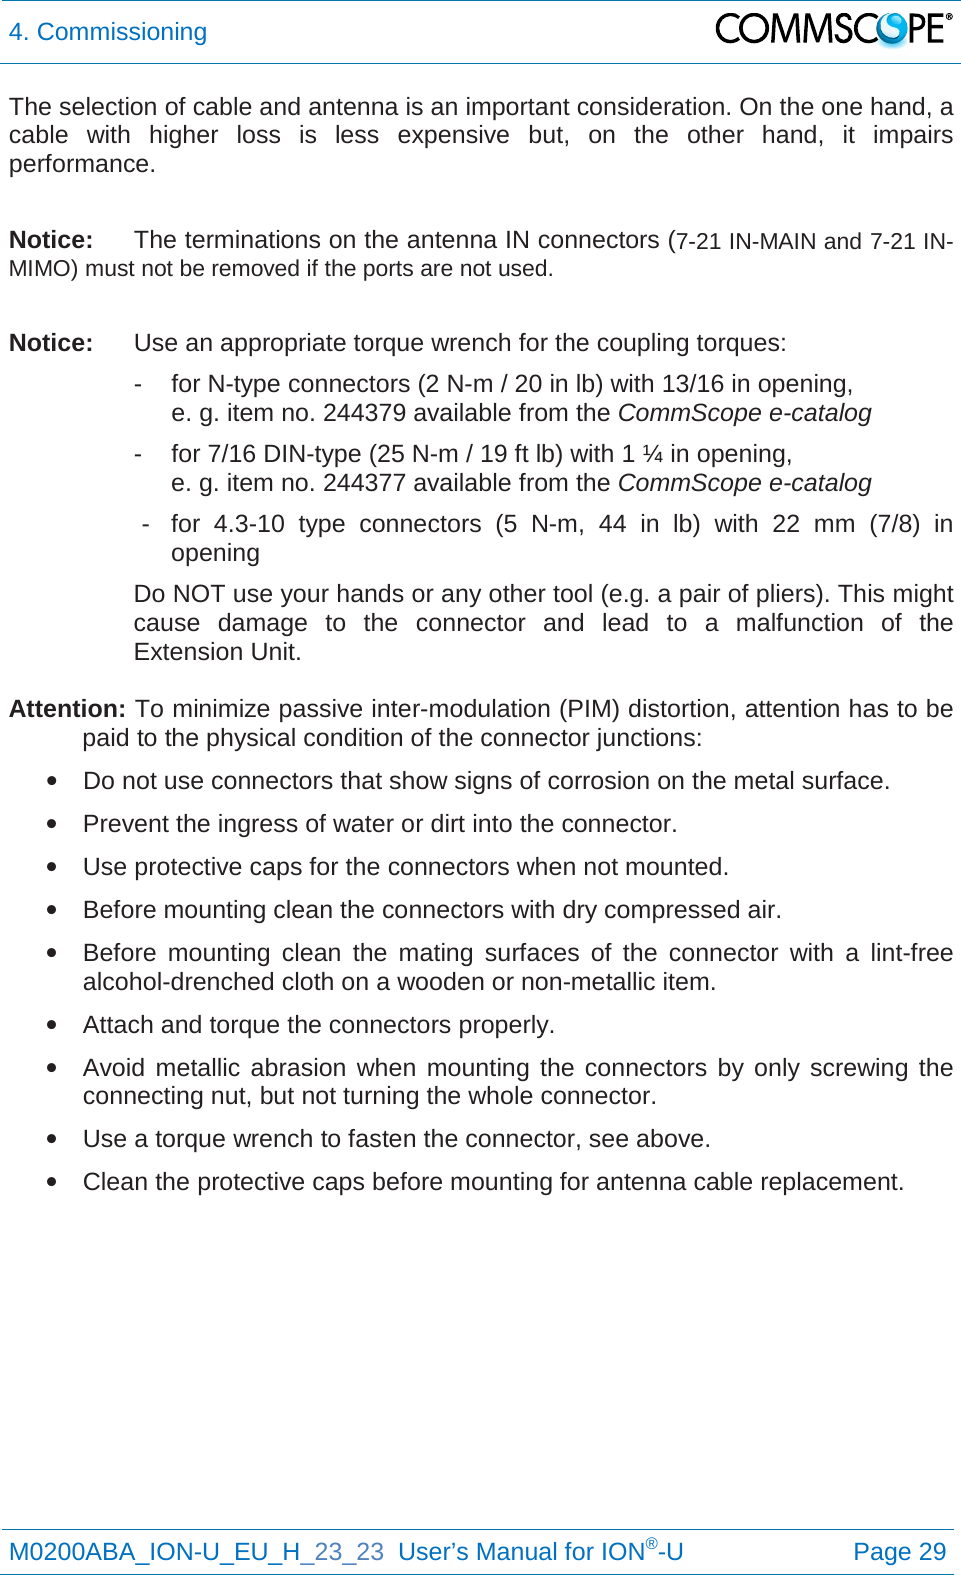 4. Commissioning   M0200ABA_ION-U_EU_H_23_23  User’s Manual for ION®-U  Page 29  The selection of cable and antenna is an important consideration. On the one hand, a cable with higher loss is less expensive but, on the other hand, it impairs performance.   Notice: The terminations on the antenna IN connectors (7-21 IN-MAIN and 7-21 IN-MIMO) must not be removed if the ports are not used.  Notice: Use an appropriate torque wrench for the coupling torques:   -  for N-type connectors (2 N-m / 20 in lb) with 13/16 in opening,      e. g. item no. 244379 available from the CommScope e-catalog   -  for 7/16 DIN-type (25 N-m / 19 ft lb) with 1 ¼ in opening,      e. g. item no. 244377 available from the CommScope e-catalog   -  for 4.3-10 type connectors (5 N-m, 44 in lb) with 22 mm (7/8) in opening Do NOT use your hands or any other tool (e.g. a pair of pliers). This might cause damage to the connector and lead to a malfunction of the Extension Unit.  Attention: To minimize passive inter-modulation (PIM) distortion, attention has to be paid to the physical condition of the connector junctions: • Do not use connectors that show signs of corrosion on the metal surface. • Prevent the ingress of water or dirt into the connector. • Use protective caps for the connectors when not mounted. • Before mounting clean the connectors with dry compressed air. • Before mounting clean the mating surfaces of the connector with a lint-free alcohol-drenched cloth on a wooden or non-metallic item. • Attach and torque the connectors properly. • Avoid metallic abrasion when mounting the connectors by only screwing the connecting nut, but not turning the whole connector. • Use a torque wrench to fasten the connector, see above. • Clean the protective caps before mounting for antenna cable replacement.    